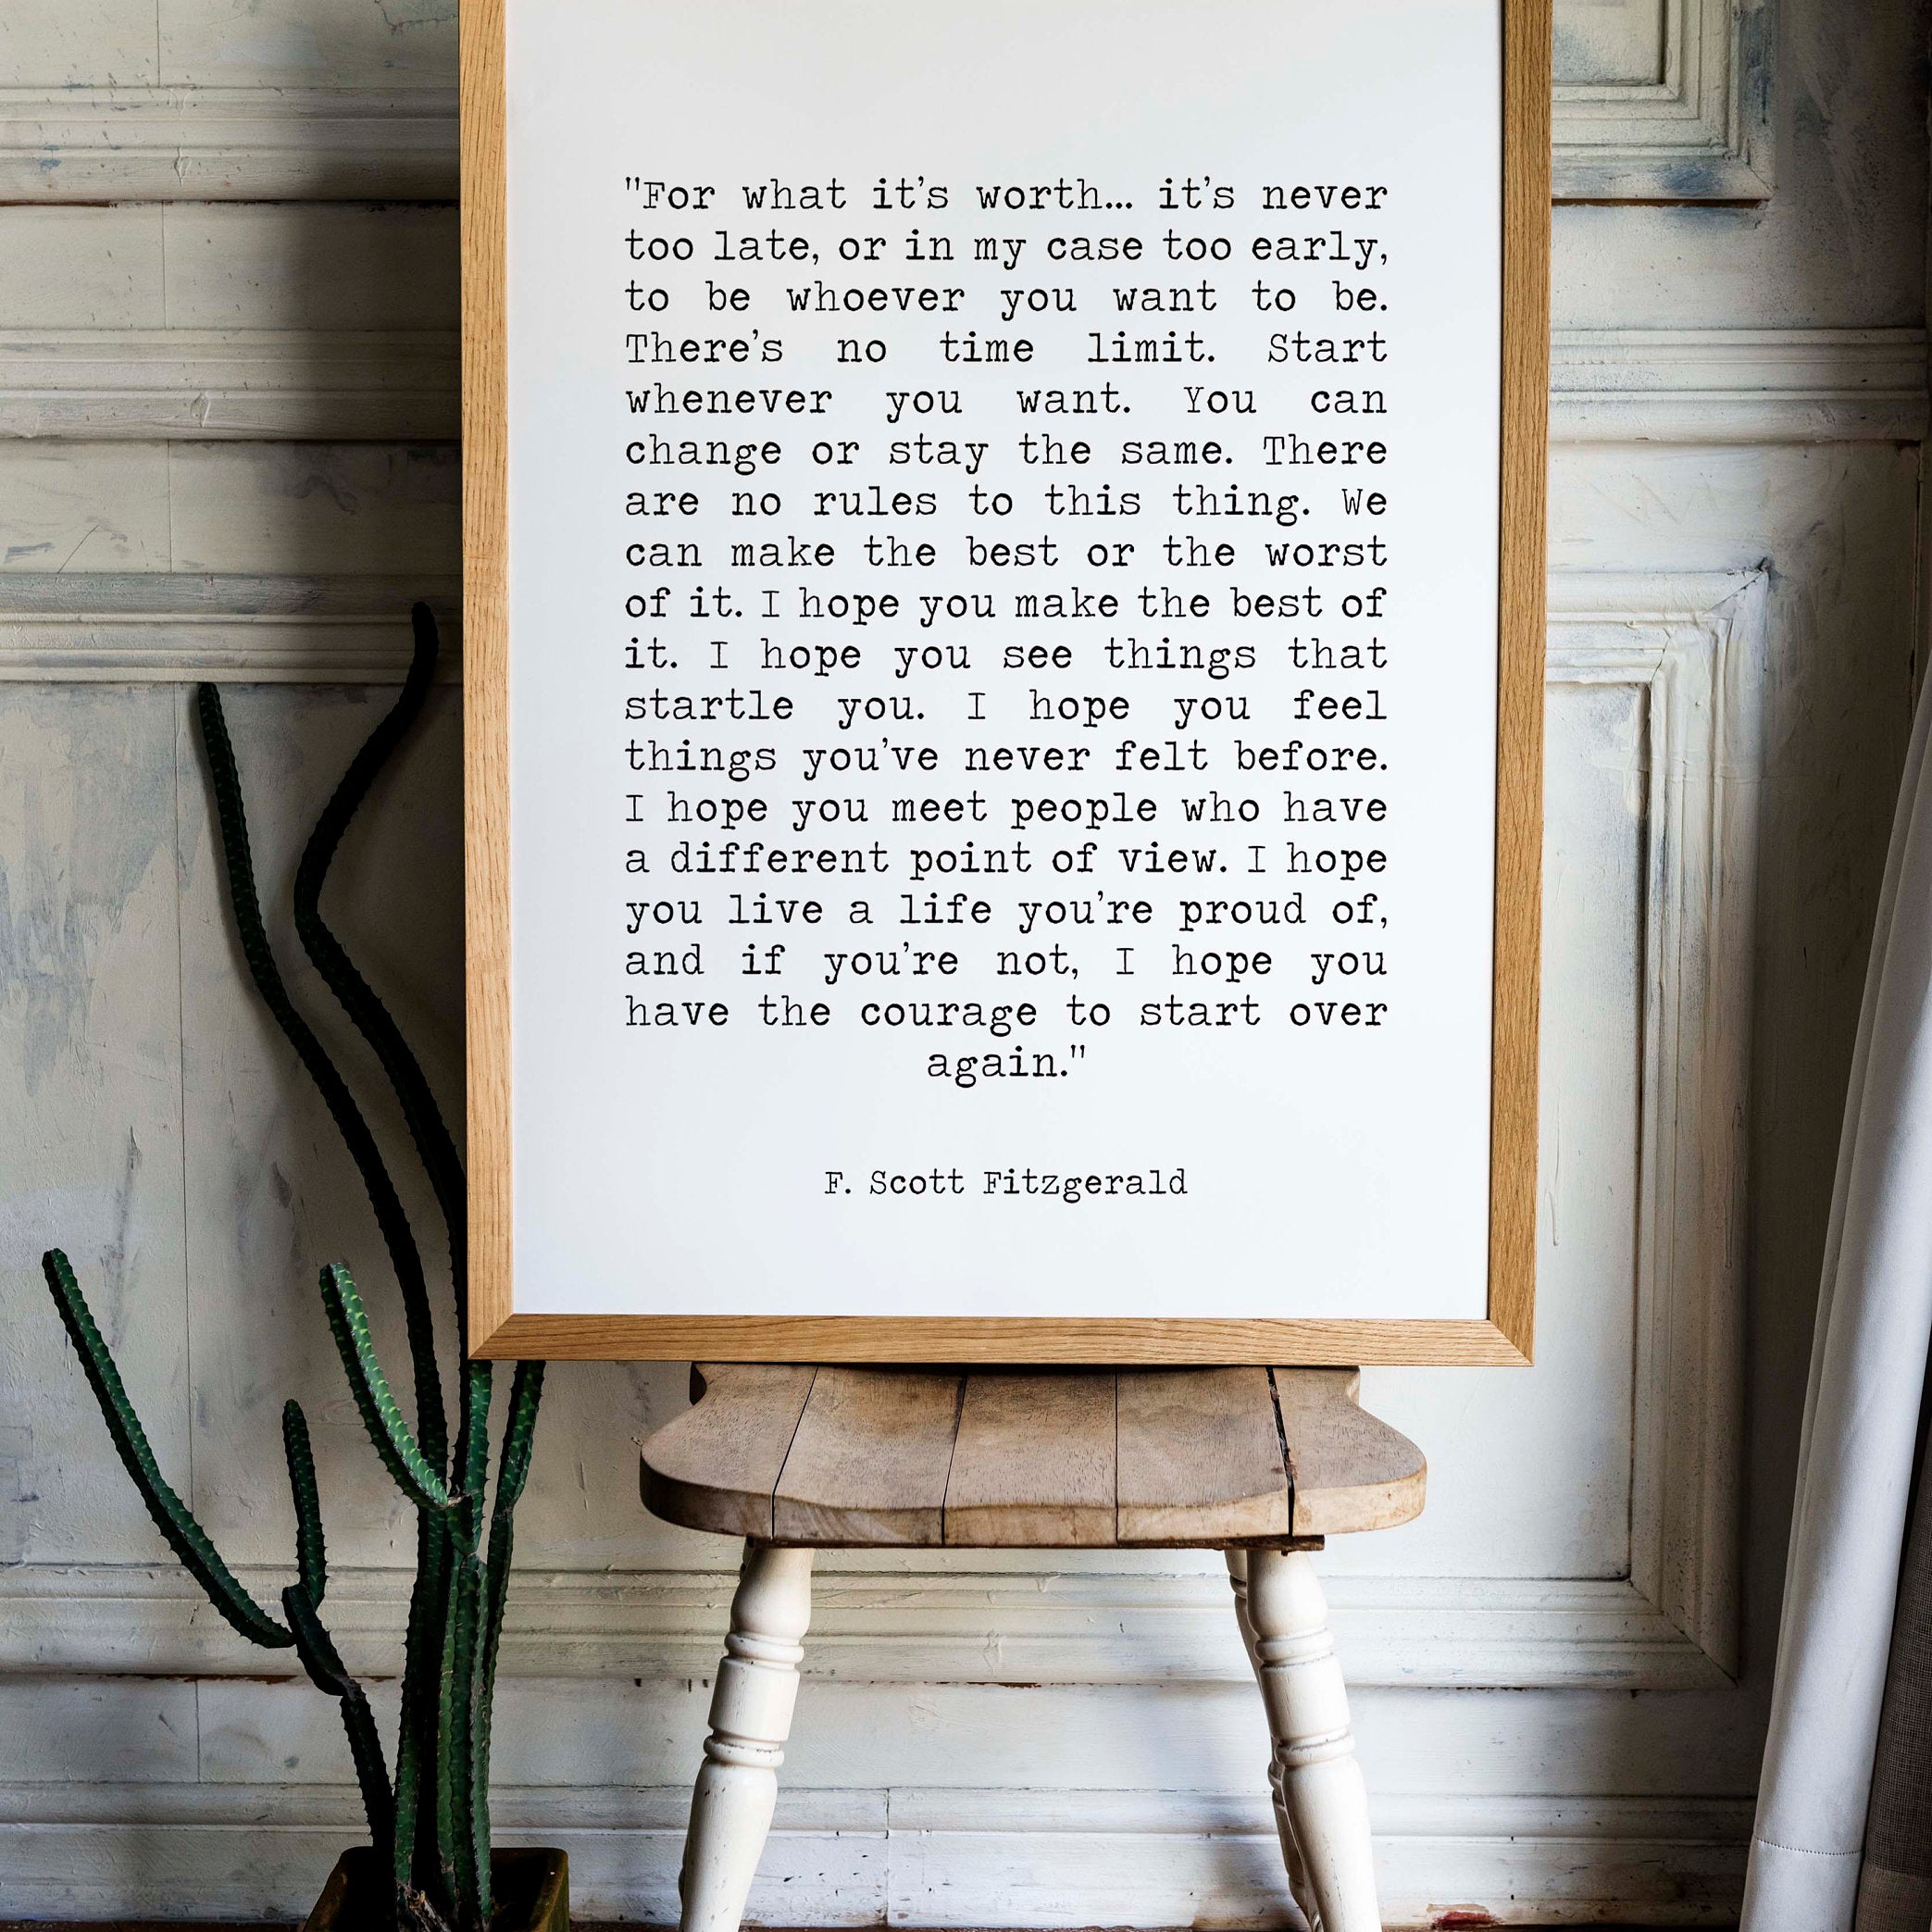 F Scott Fitzgerald For What It's Worth Quote Inspirational Print Gift, Vintage page Typography Quote Print Unframed or Framed Art